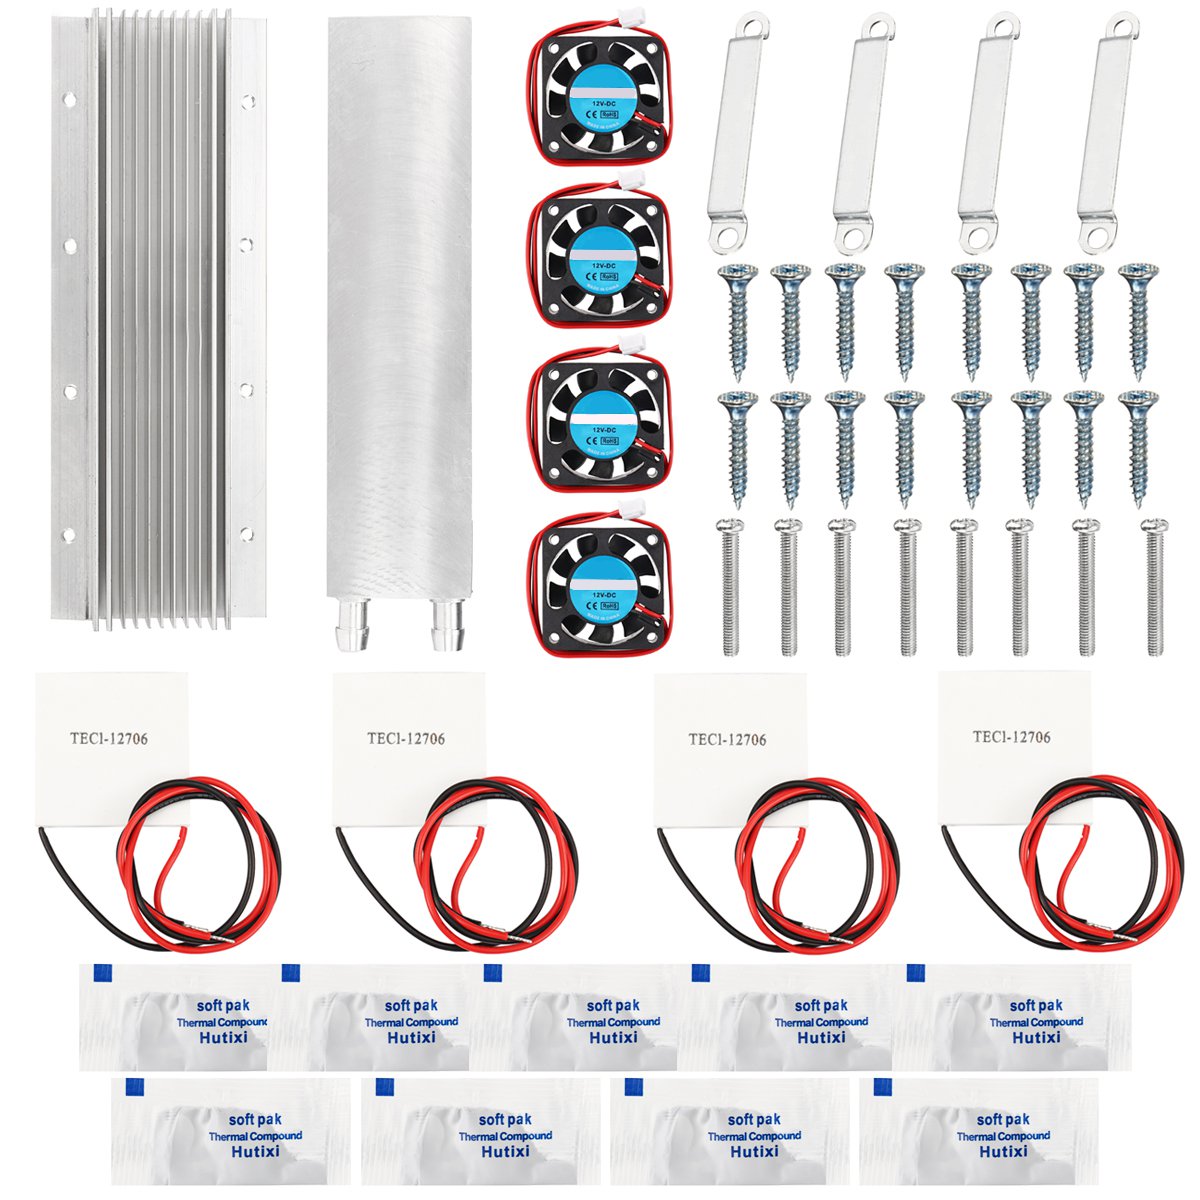 

12V Thermoelectric Peltier Semiconductor Refrigeration Water Cooling System Fan Kits